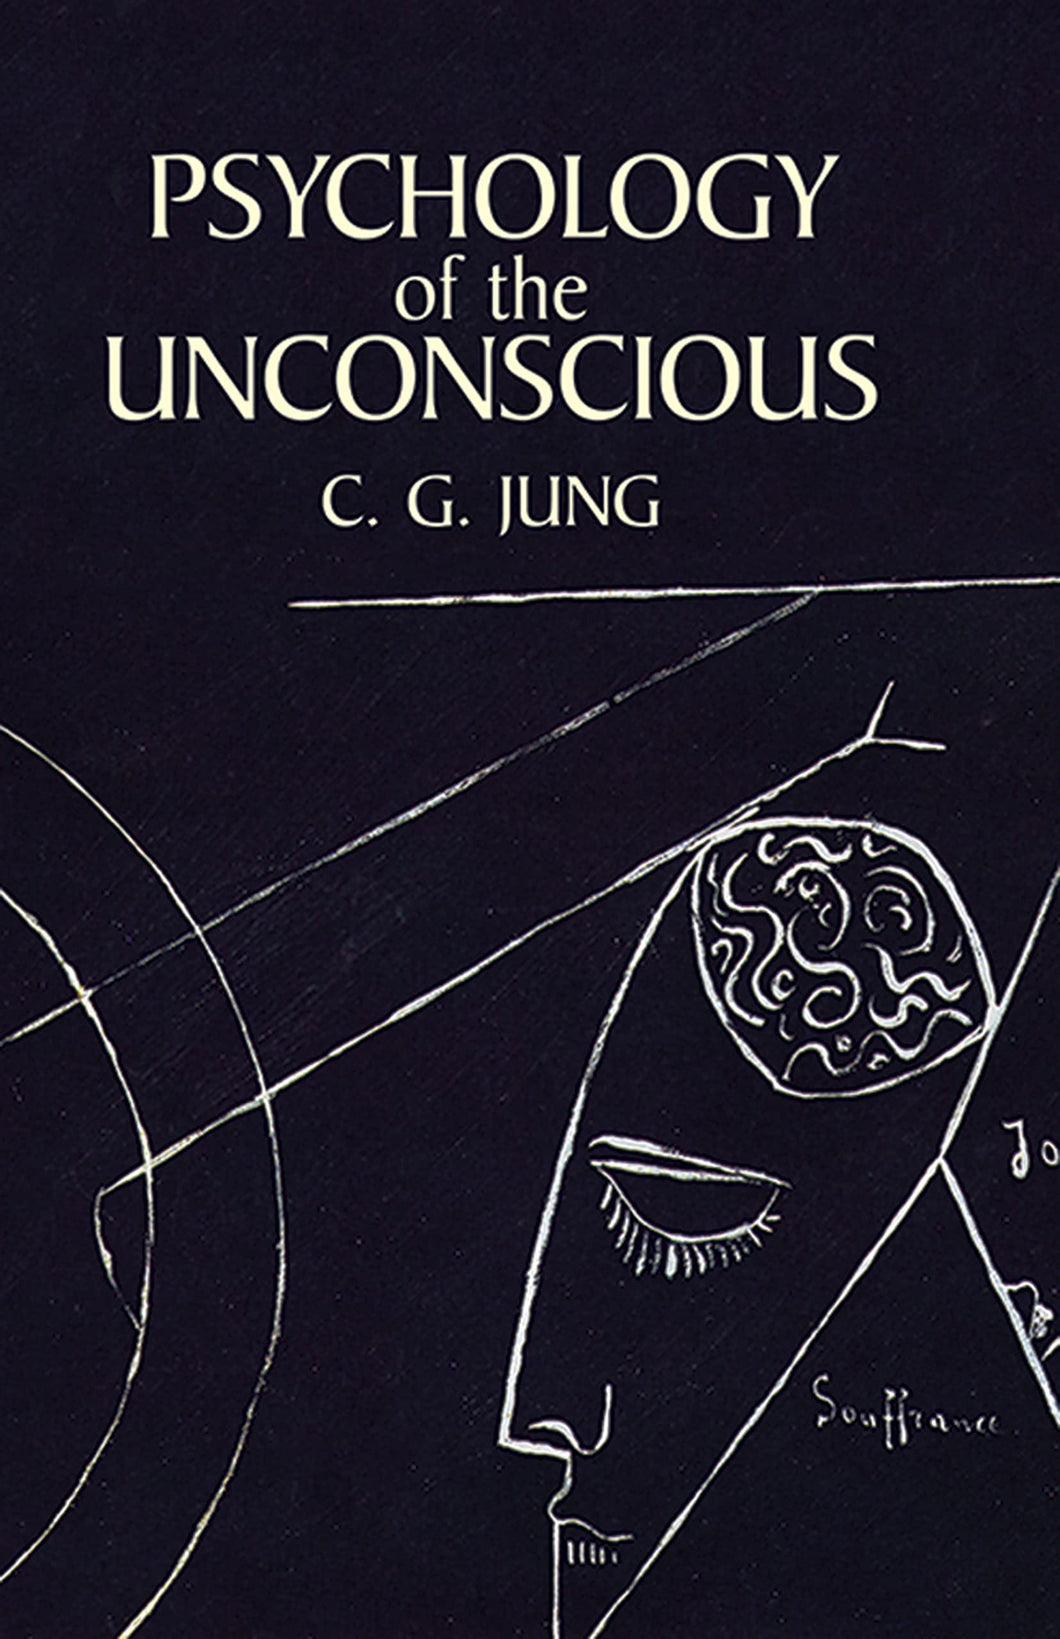 Psychology of the Unconscious by C. G. Jung